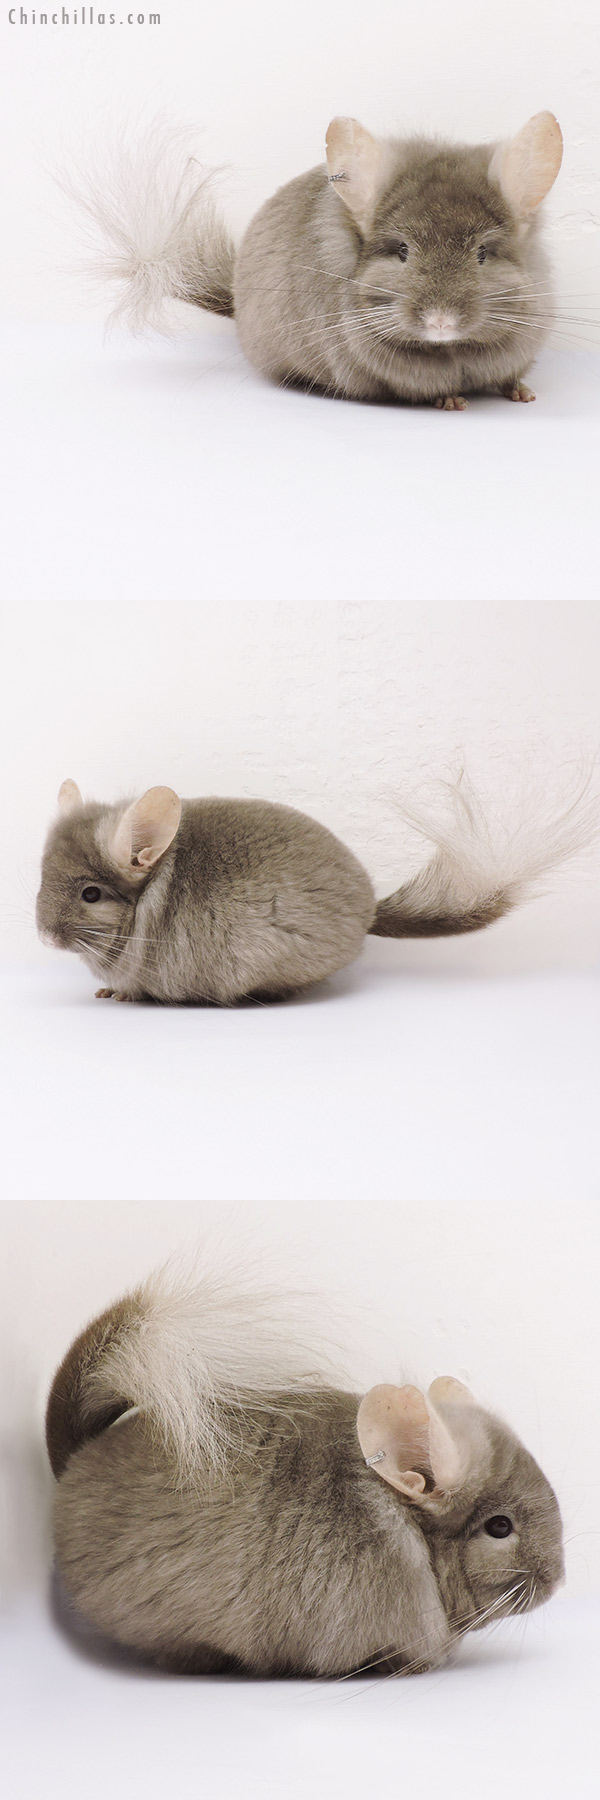 Chinchilla or related item offered for sale or export on Chinchillas.com - 15025 Rare Tan  Royal Persian Angora Male Chinchilla